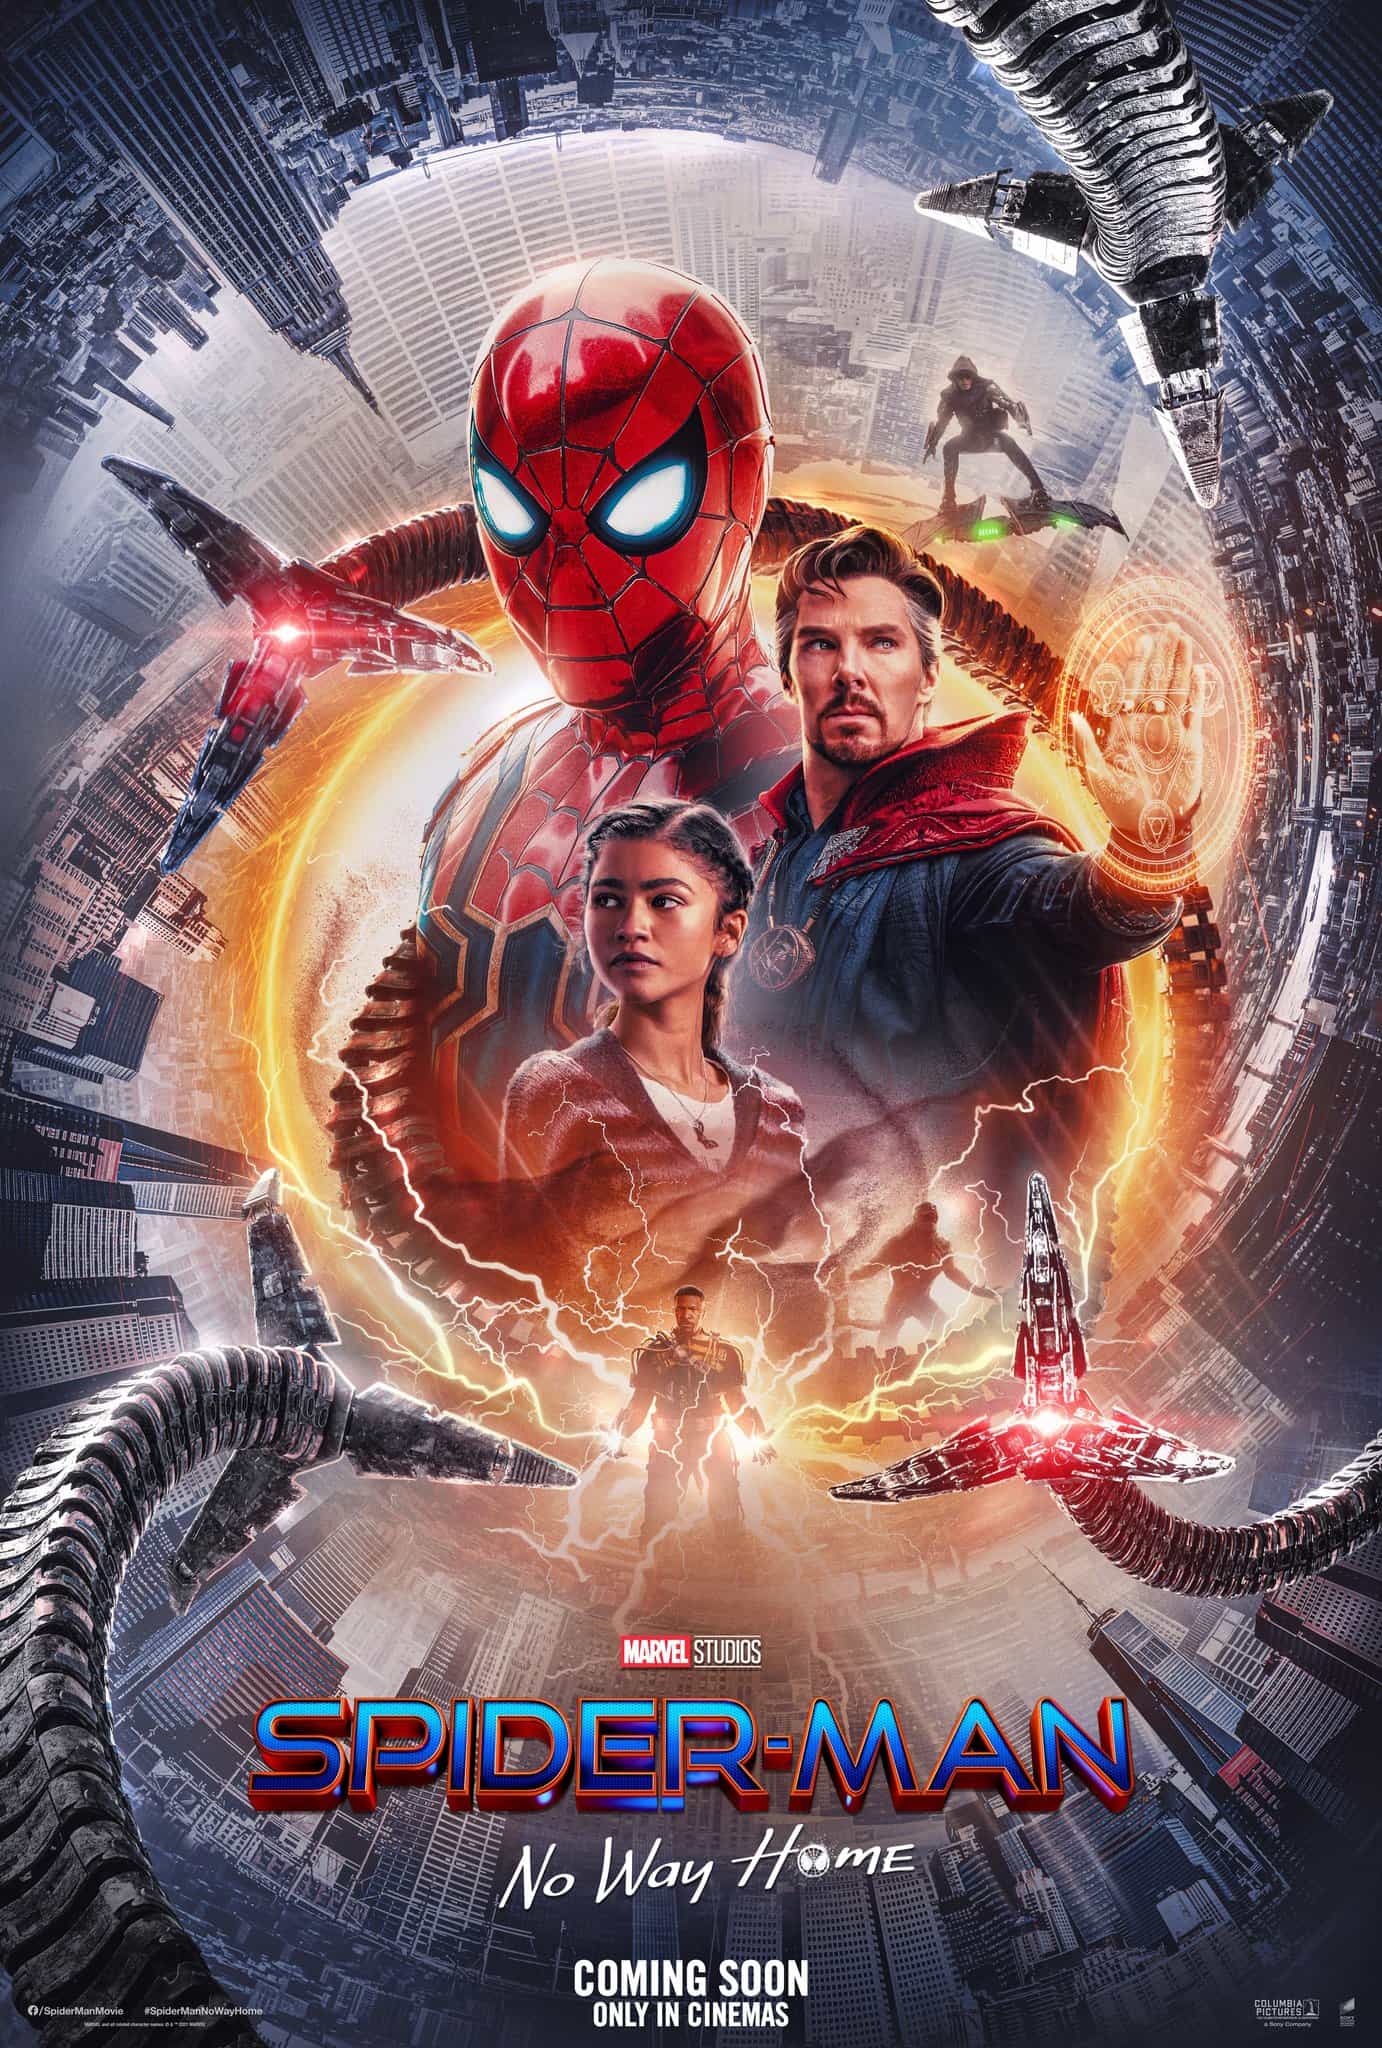 UK new movie preview 17th December 2021 - Spider-Man: No Way Home and The Lost Daughter - #spidermannowayhome #thelostdaughter